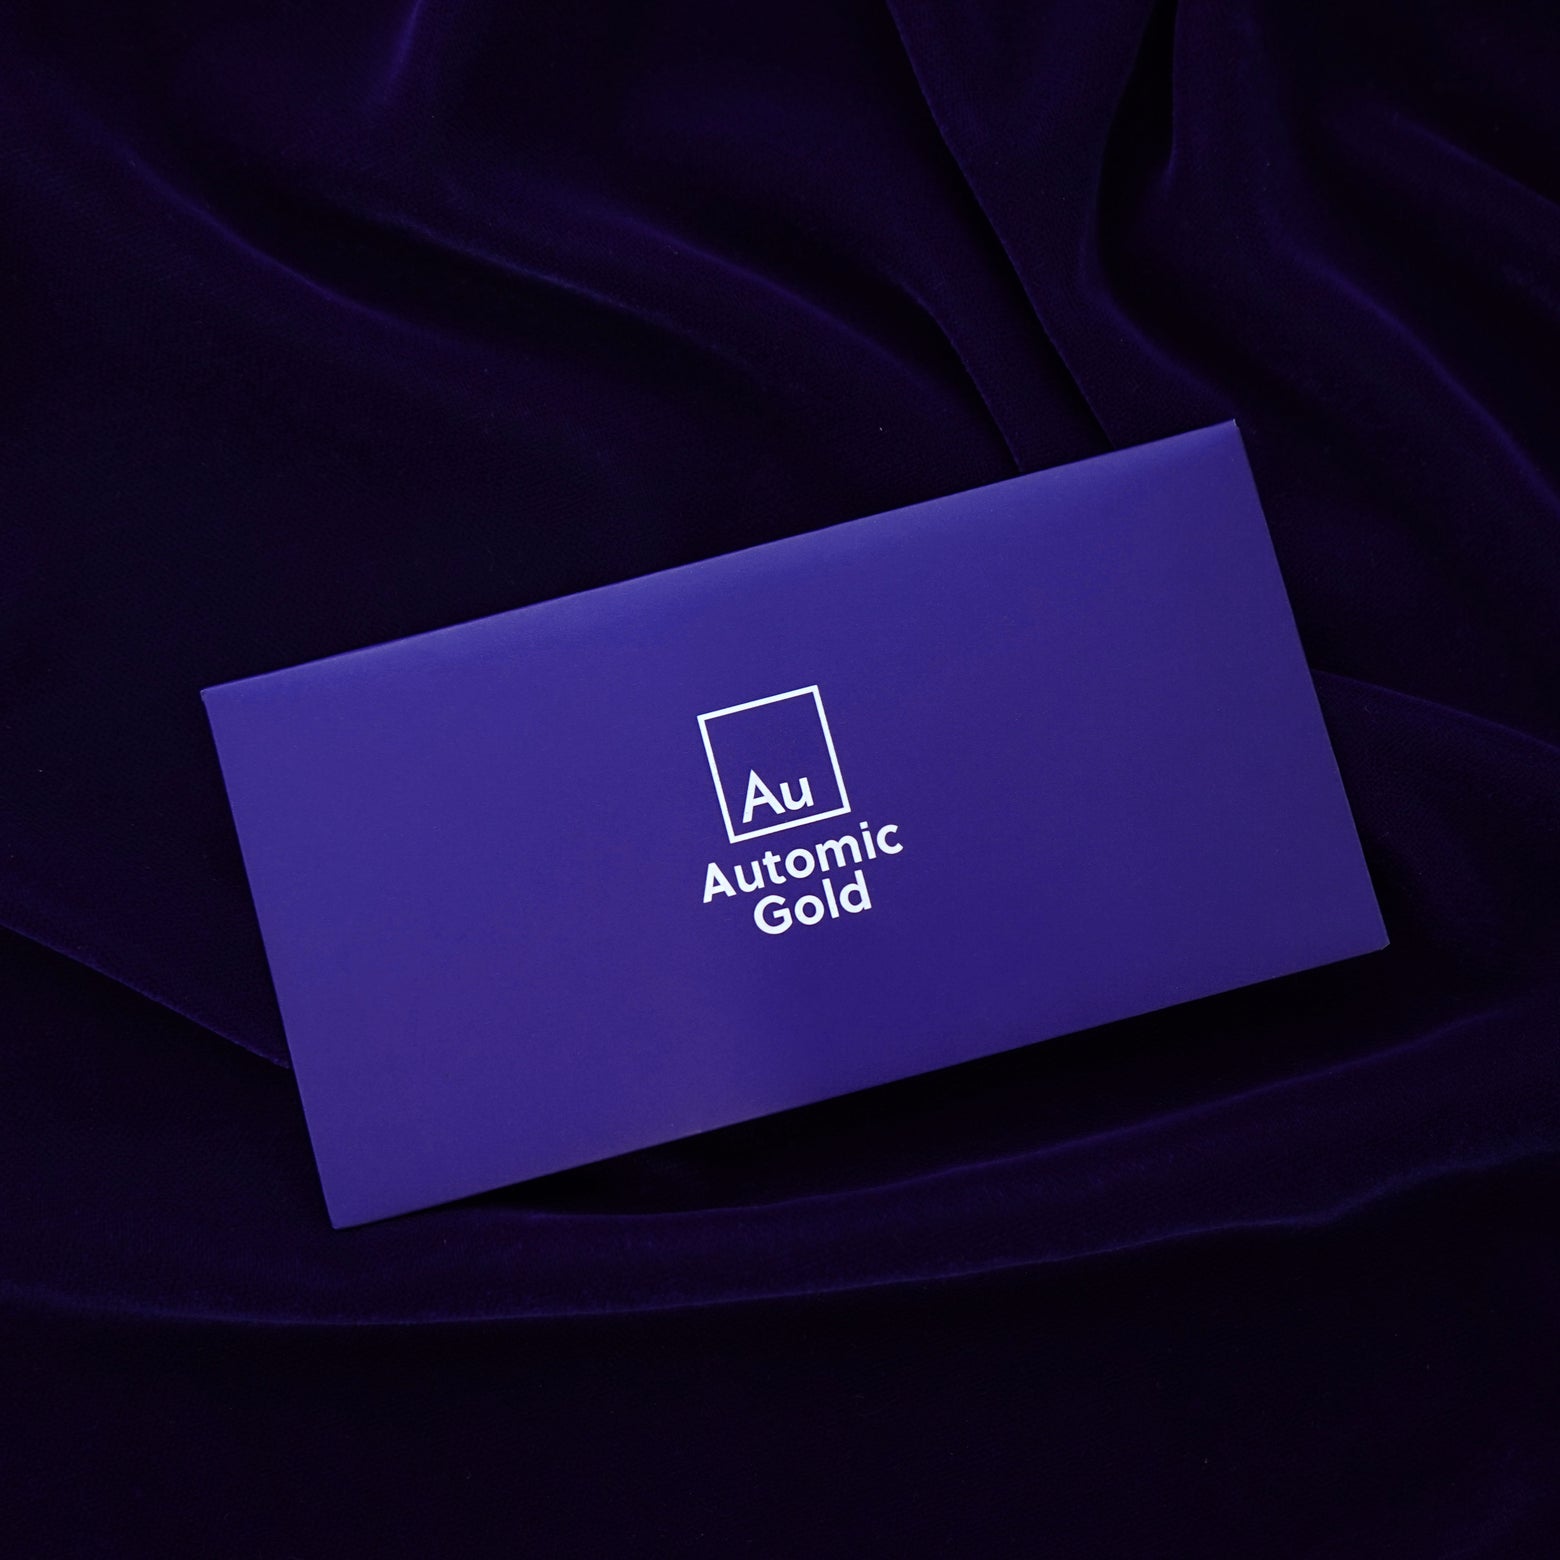 An Automic Gold branded envelope containing a polishing cloth sitting on a dark blue background